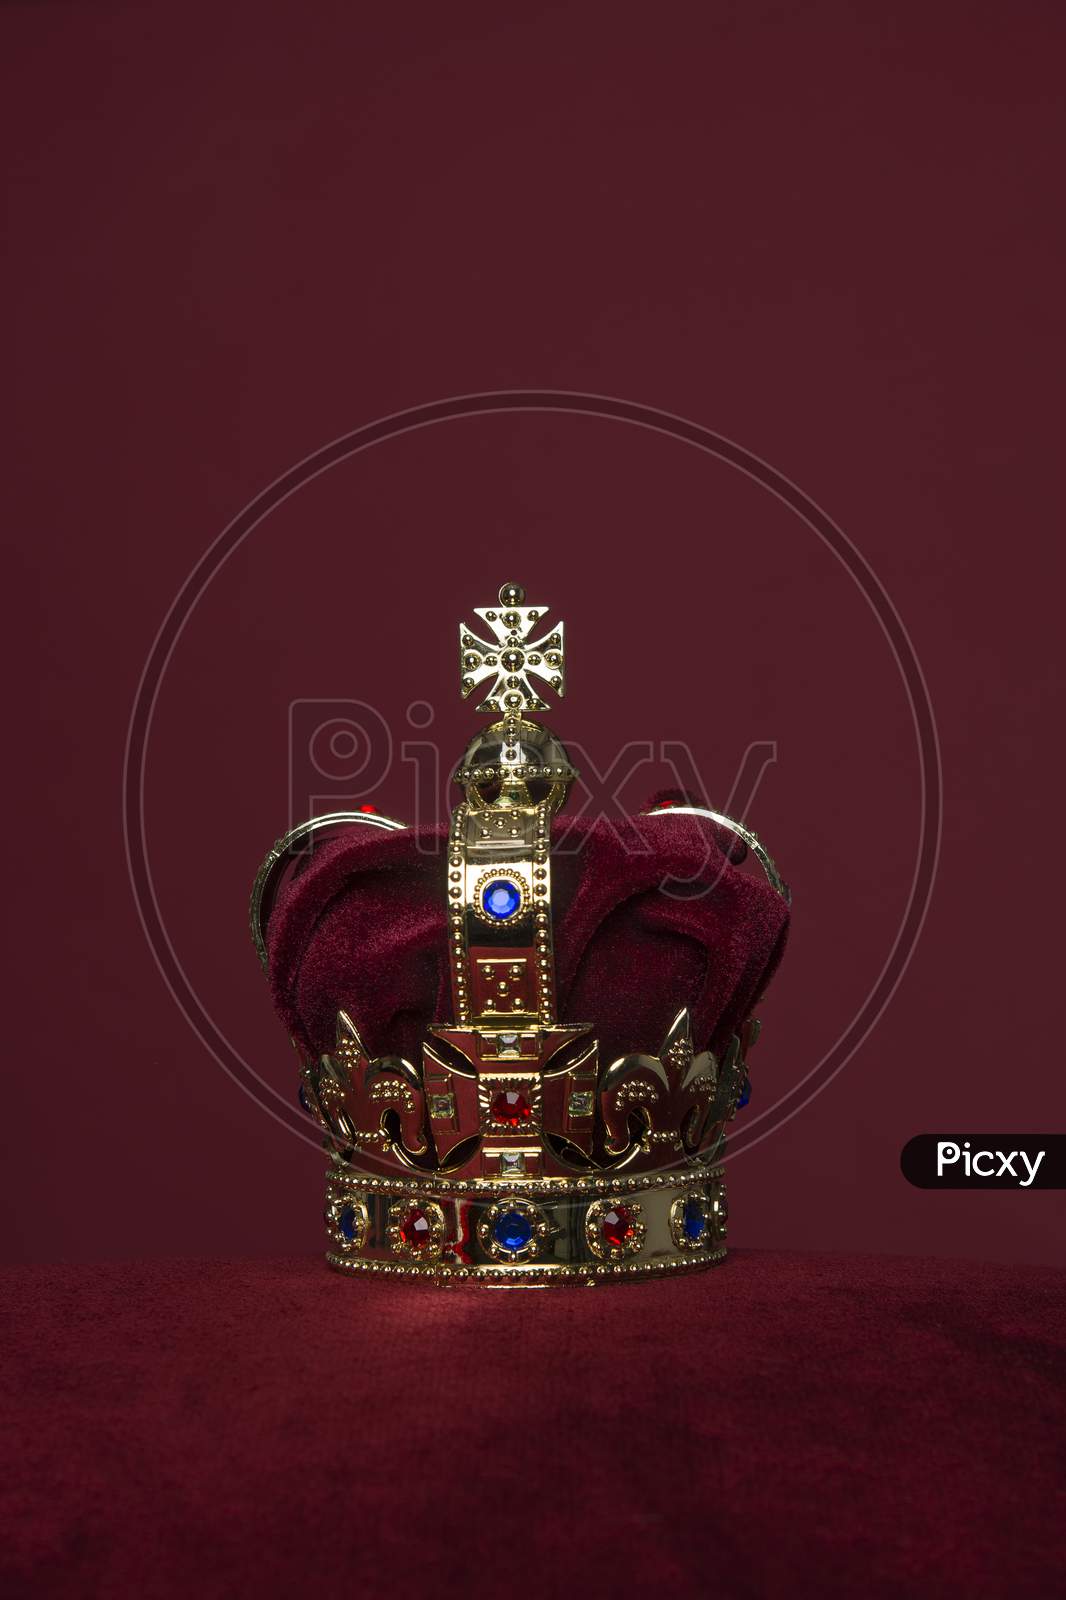 Golden Crown On A Velvet Cushion On A Deep Red Background With Copy Space In A Vertical Image